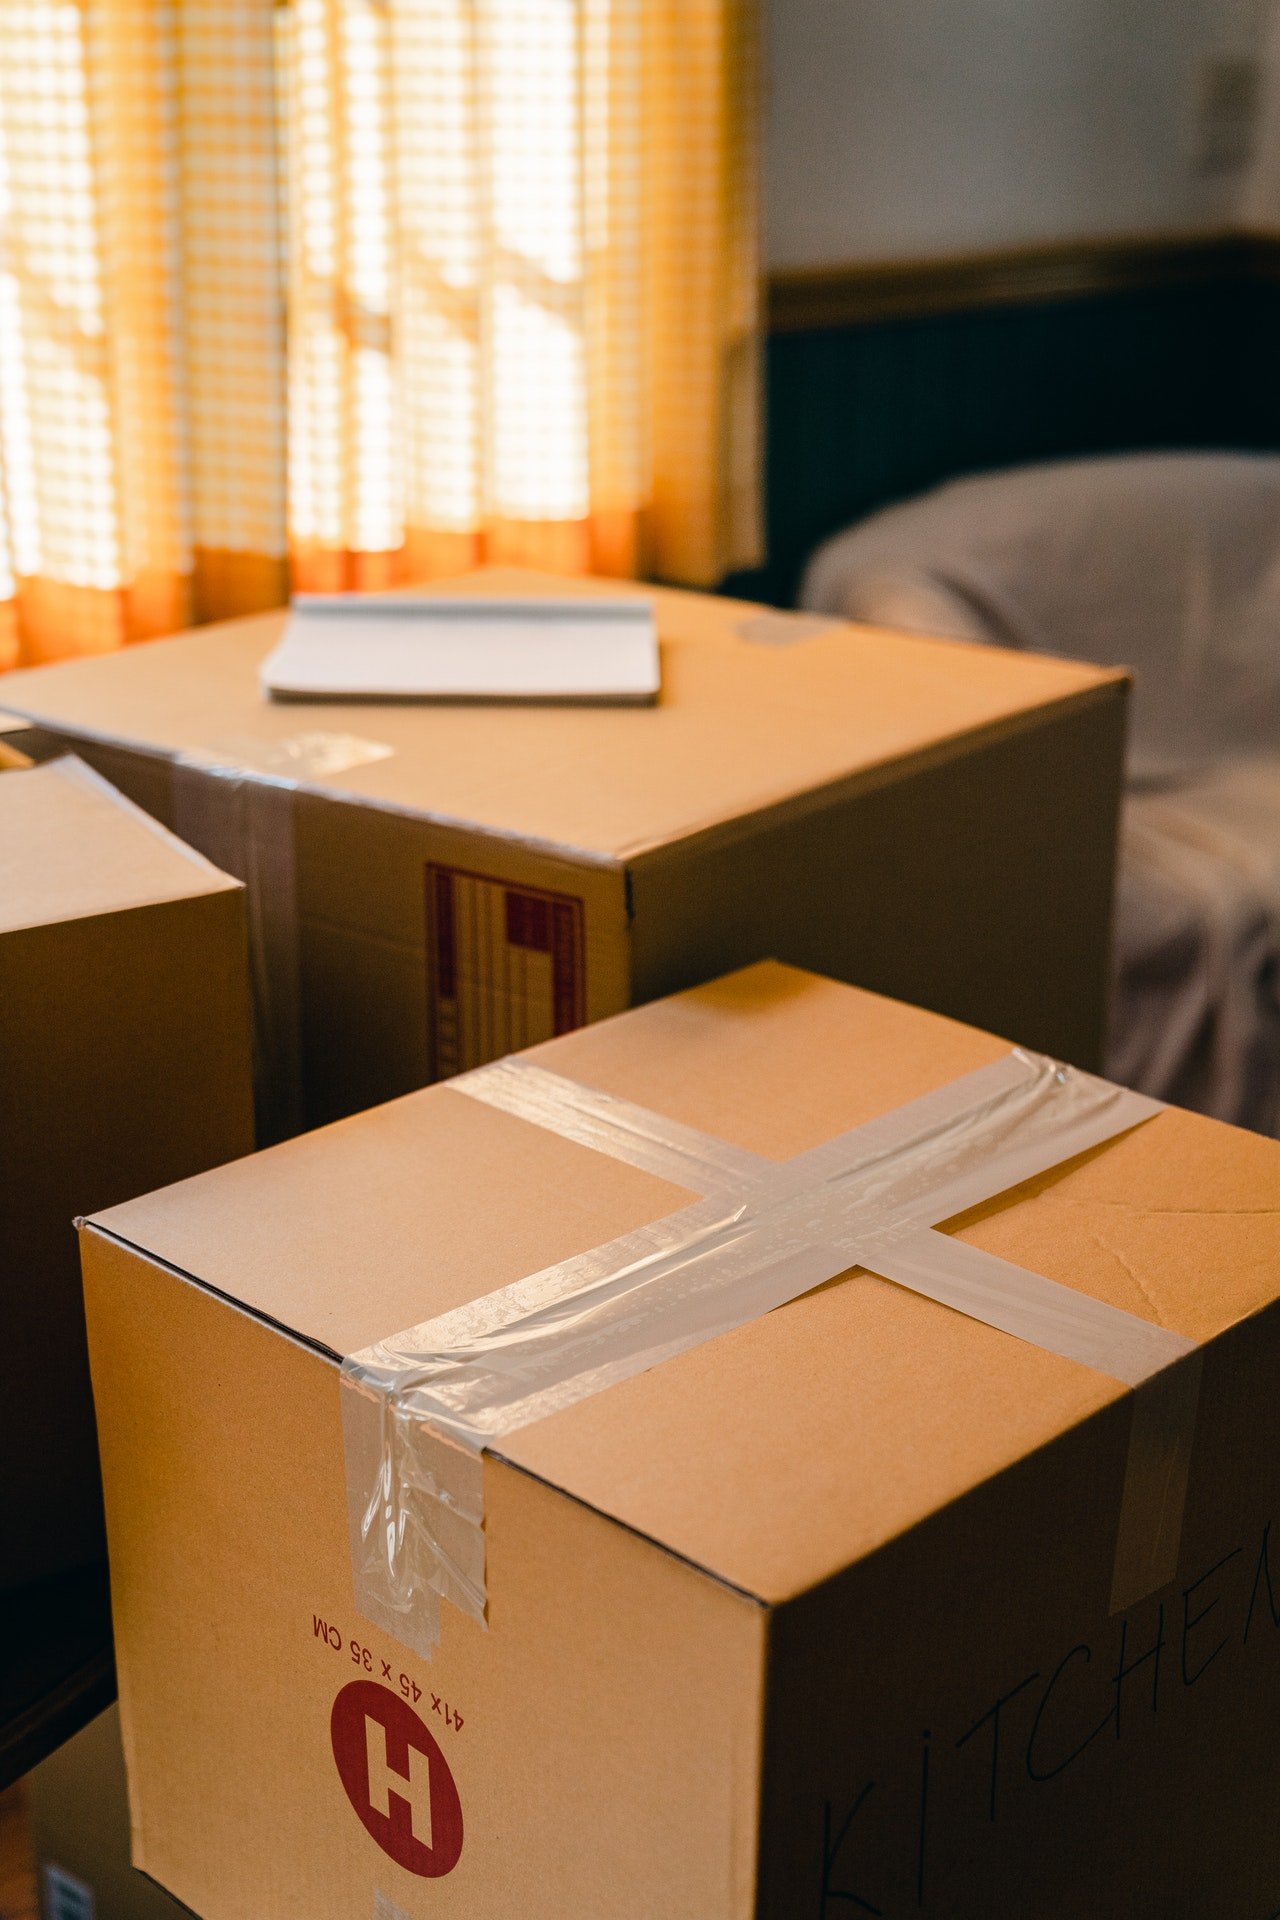 While moving to a new house, Amelia accidentally dropped the old box and its contents were revealed. | Source: Pexels